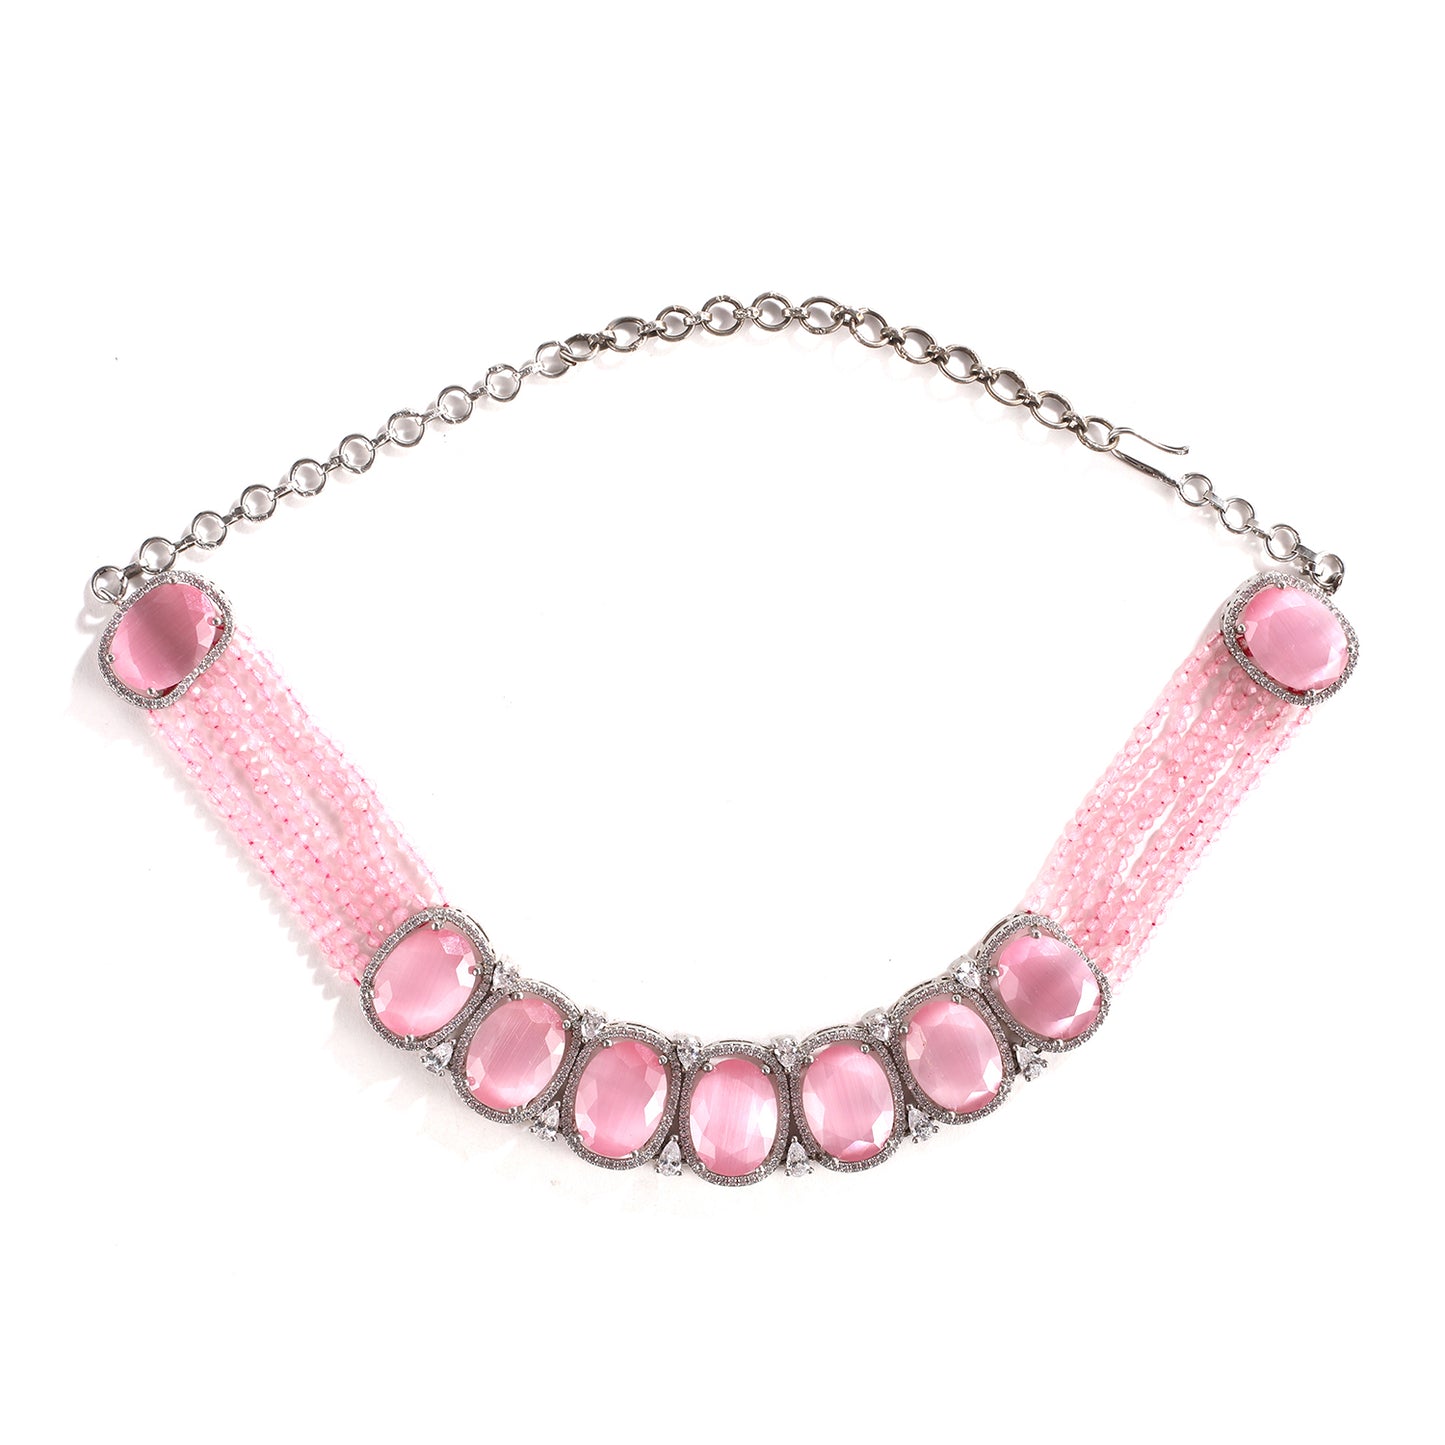 Baby Pink American Diamond Choker Necklace Set with Earrings